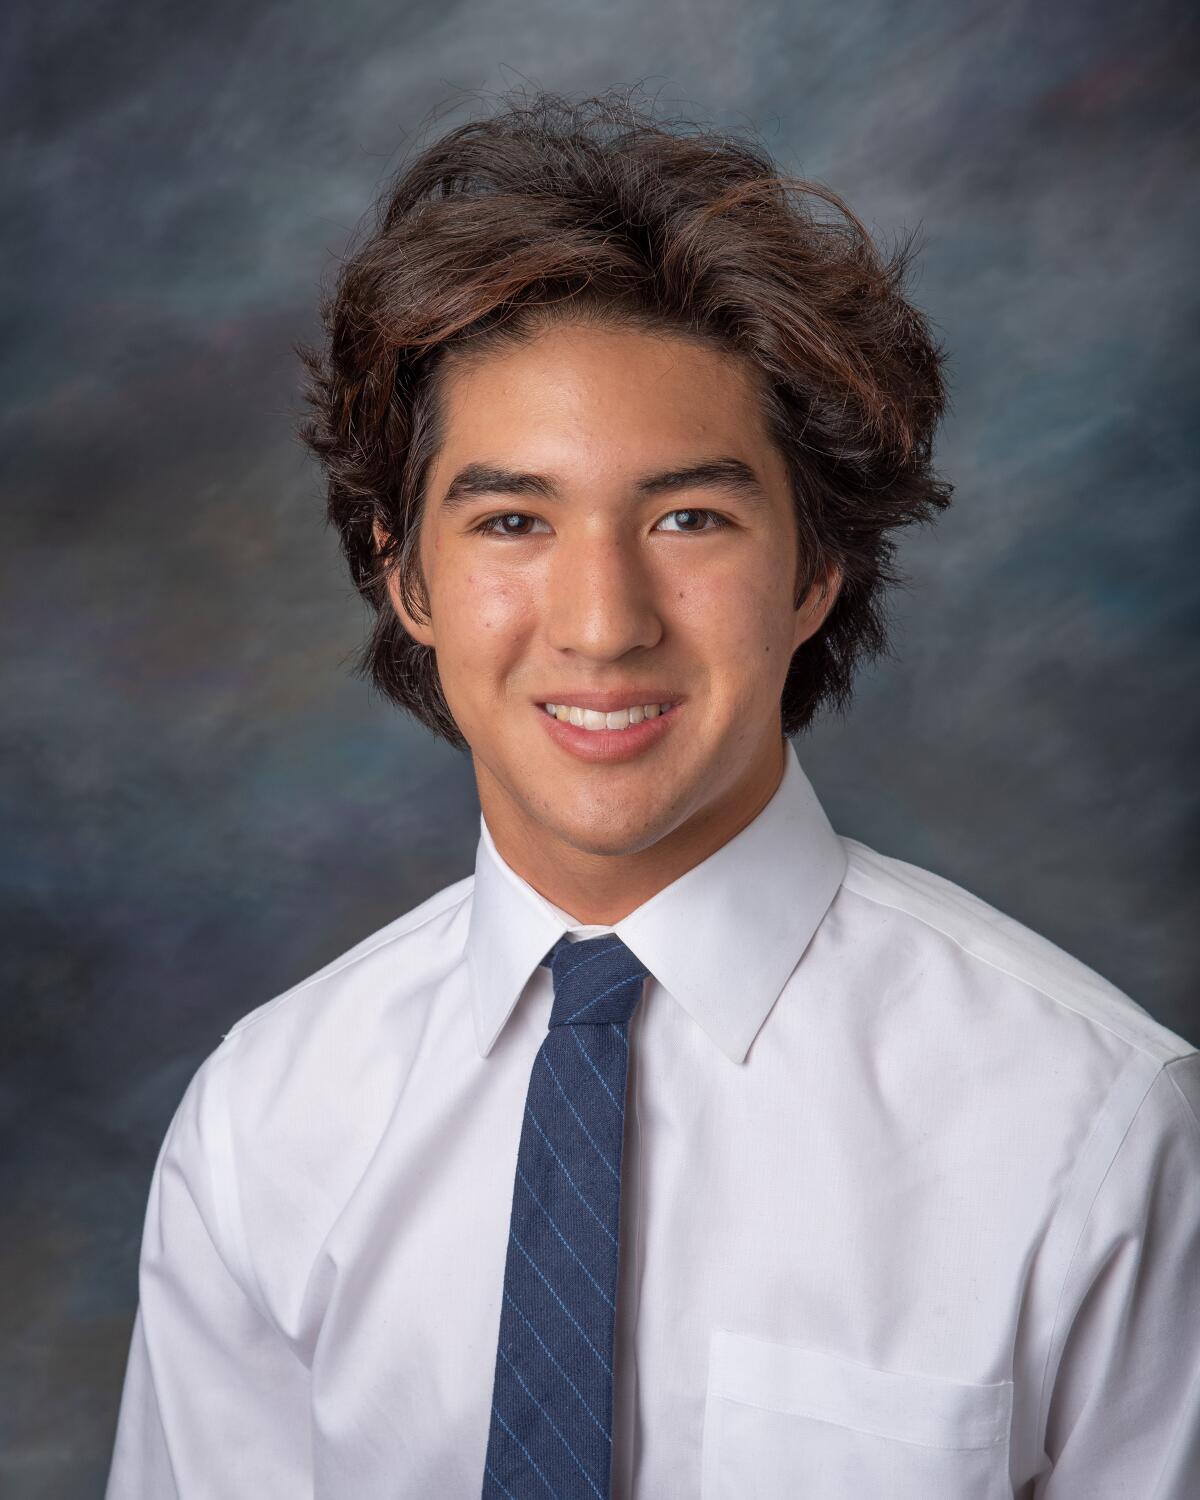 Joshua Hangartner, who will be a senior next school year at La Jolla Country Day, won an essay competition on world history.